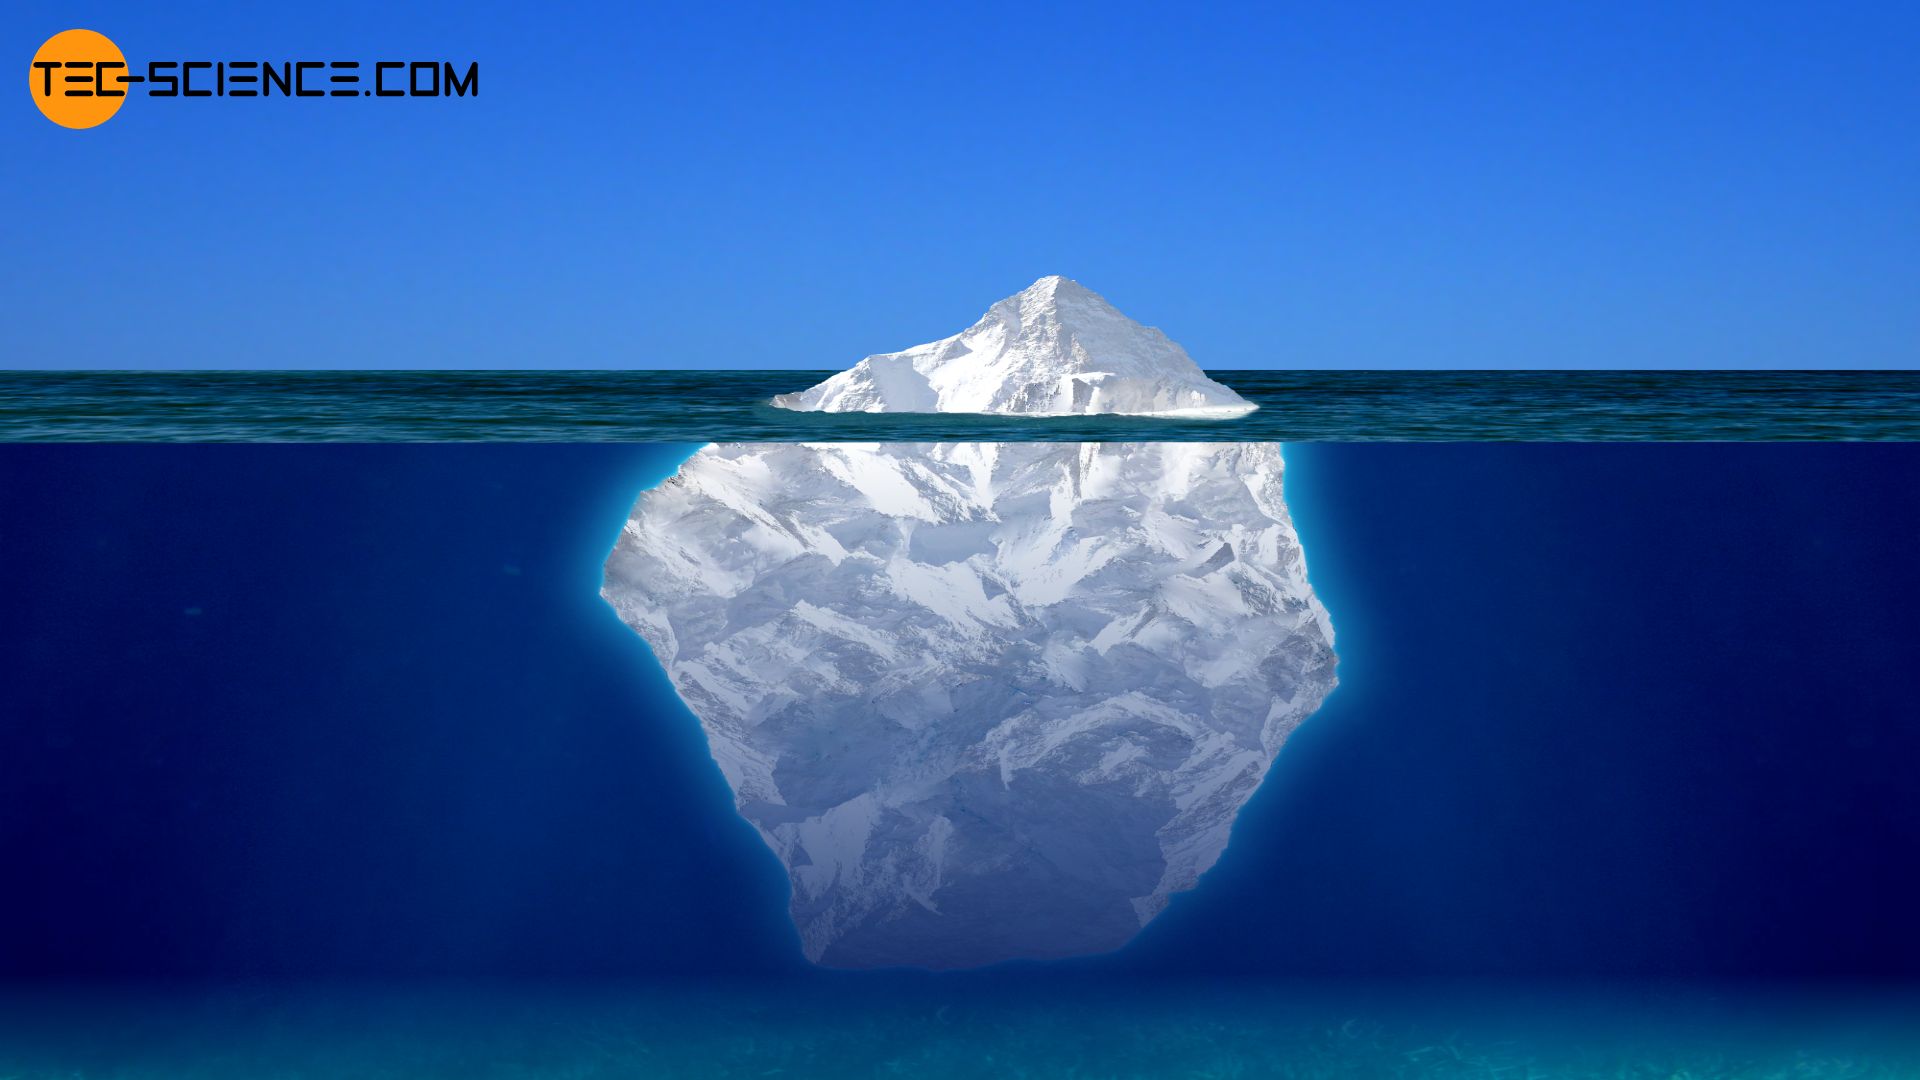 An iceberg floats on the water surface, with the largest part below